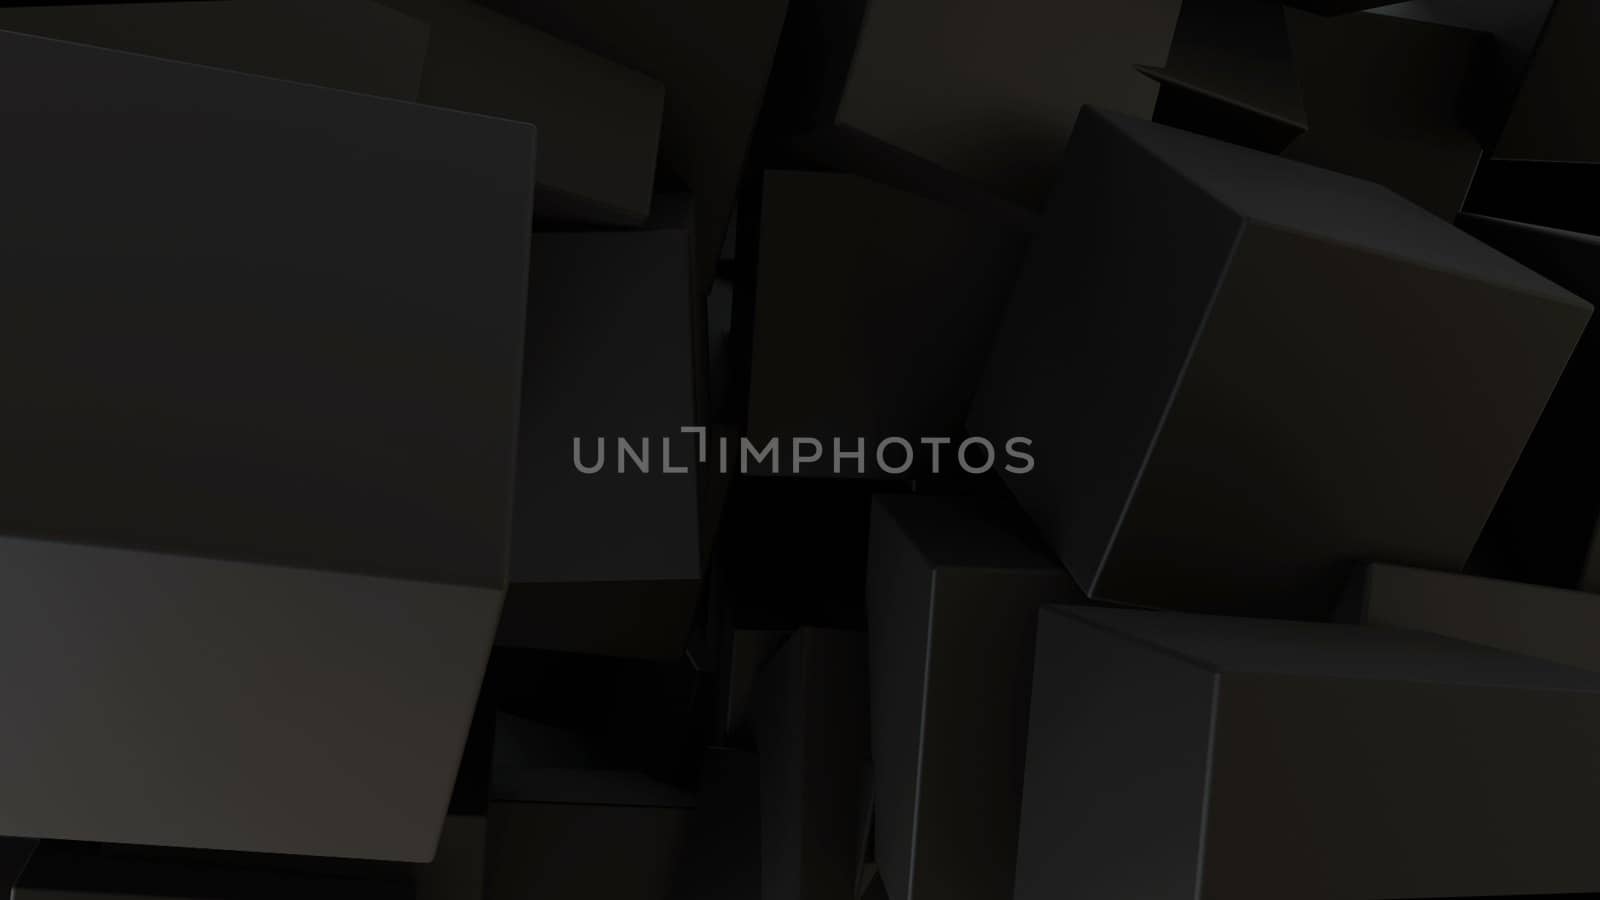 Abstract black cubes background. 3d rendering digital backdrop